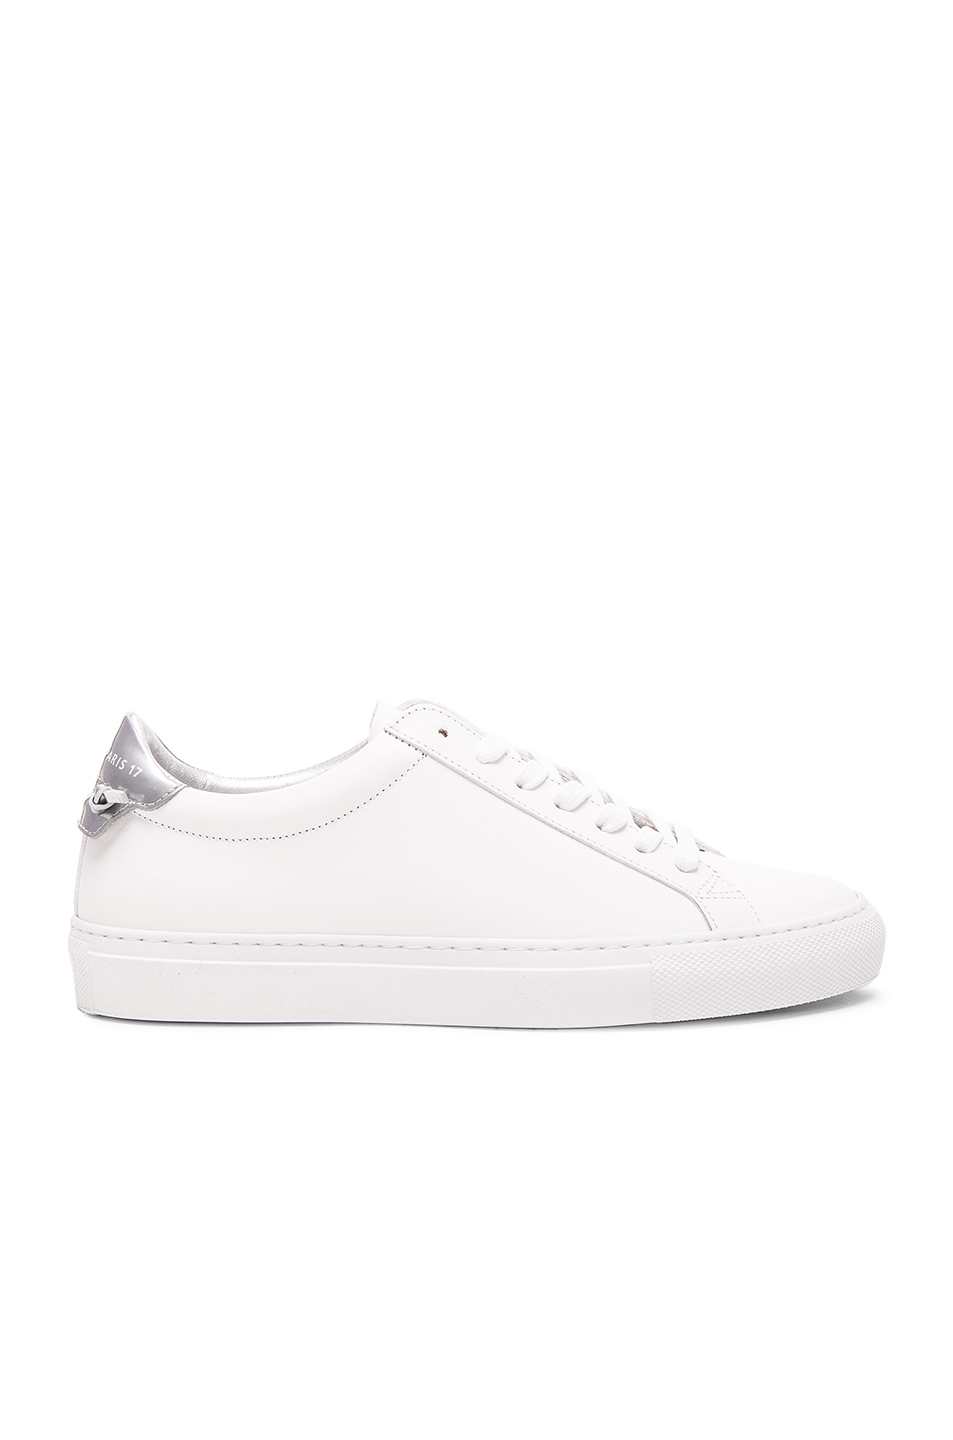 Givenchy Leather Urban Knots Low 